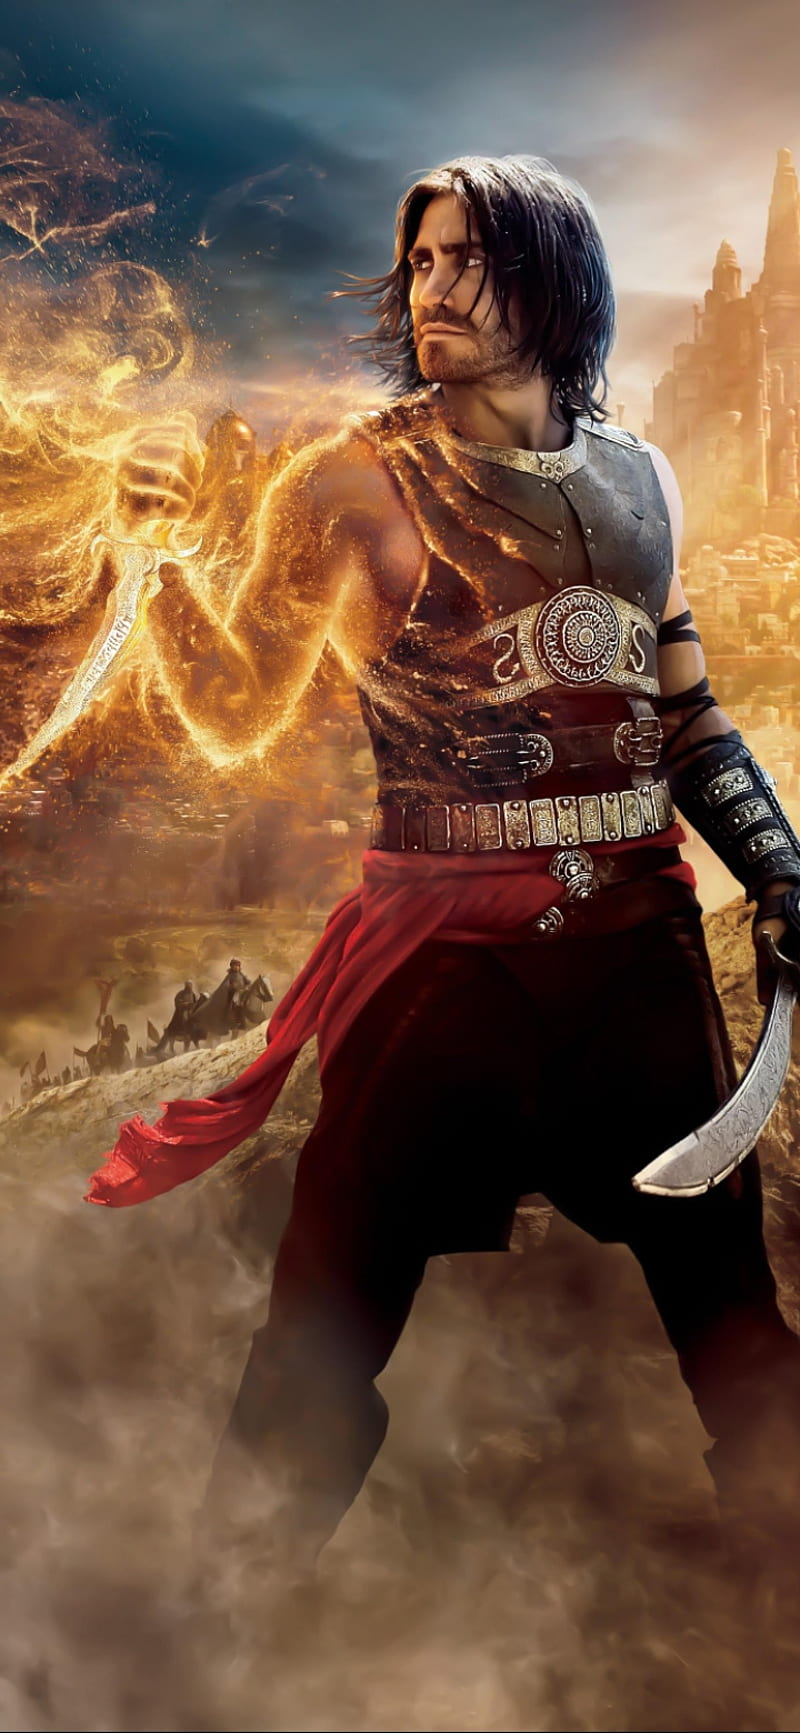 Prince of persia , dastan, prince of persia, the sands of time, HD phone wallpaper